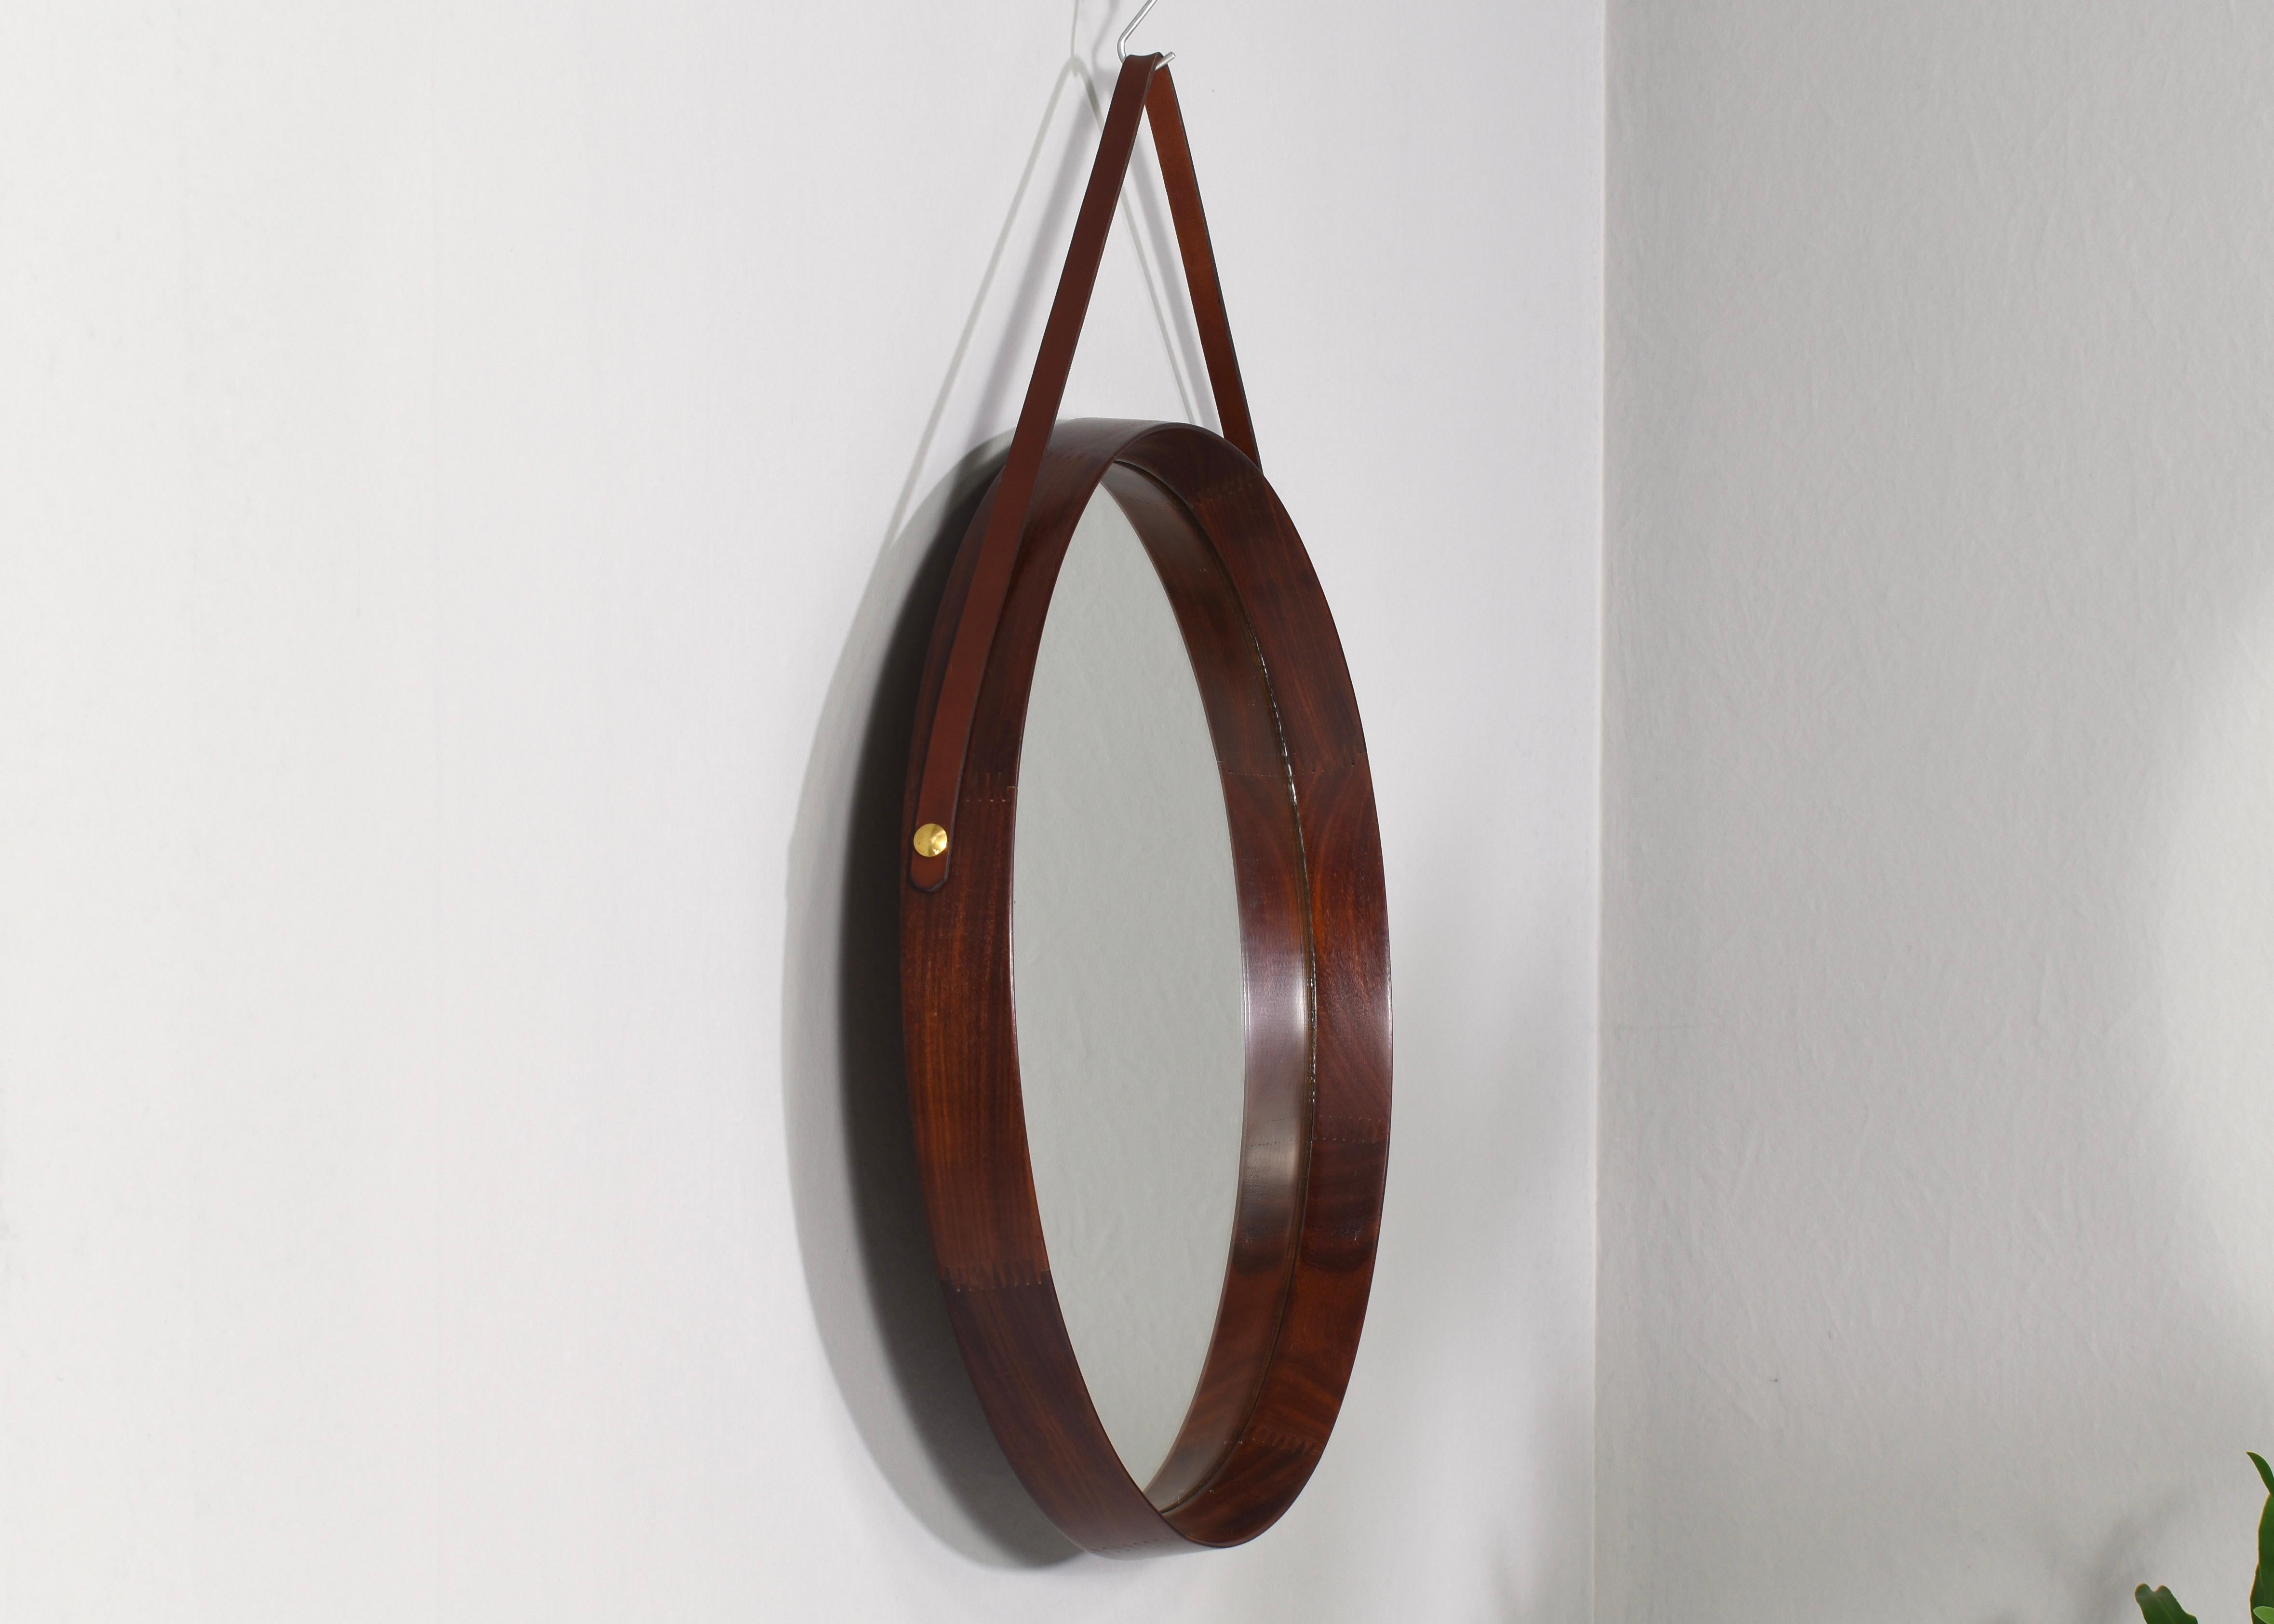 Round Italian Wall Mirror in Solid Teak, Leather and Brass, 1950s For Sale 2